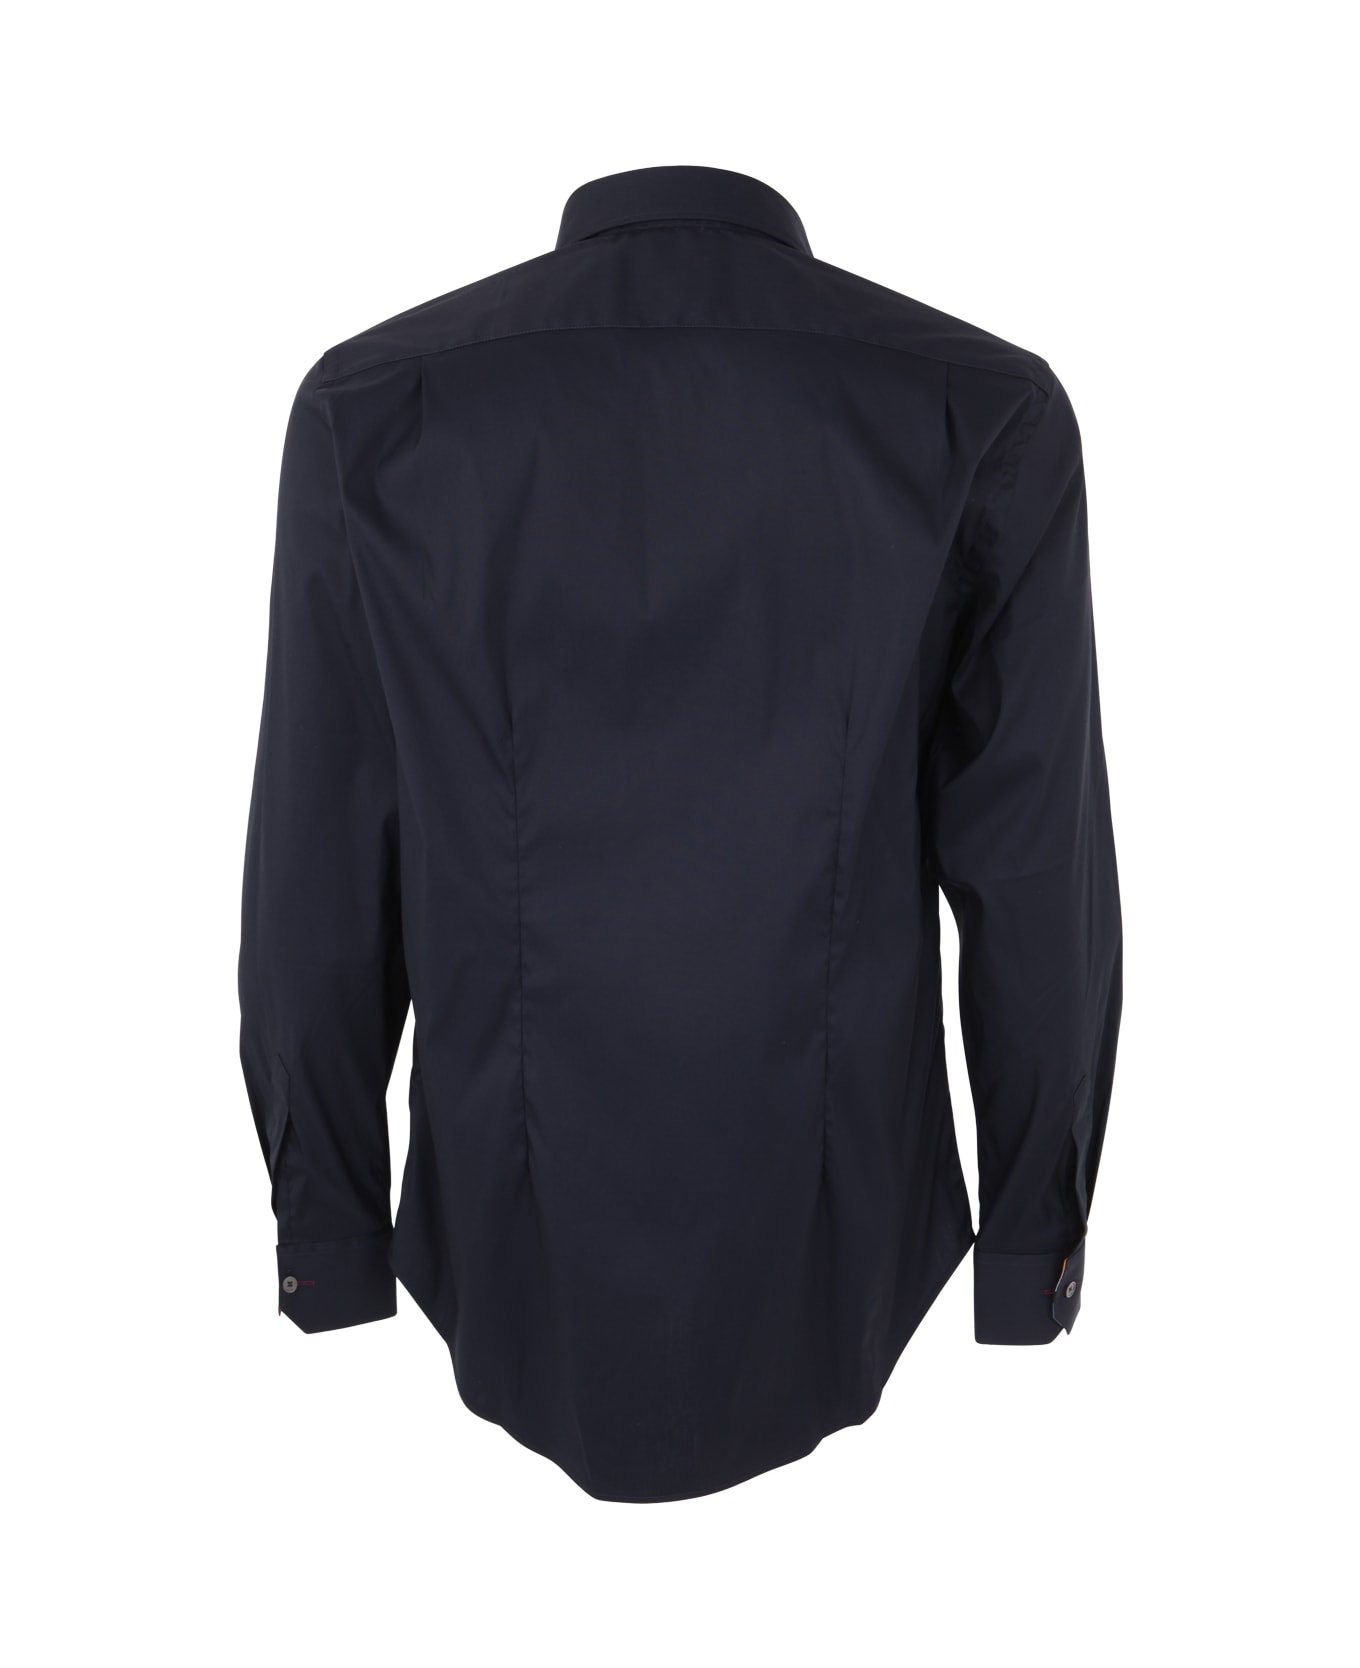 Paul Smith Mens Tailored Fit Shirt - Dk Na